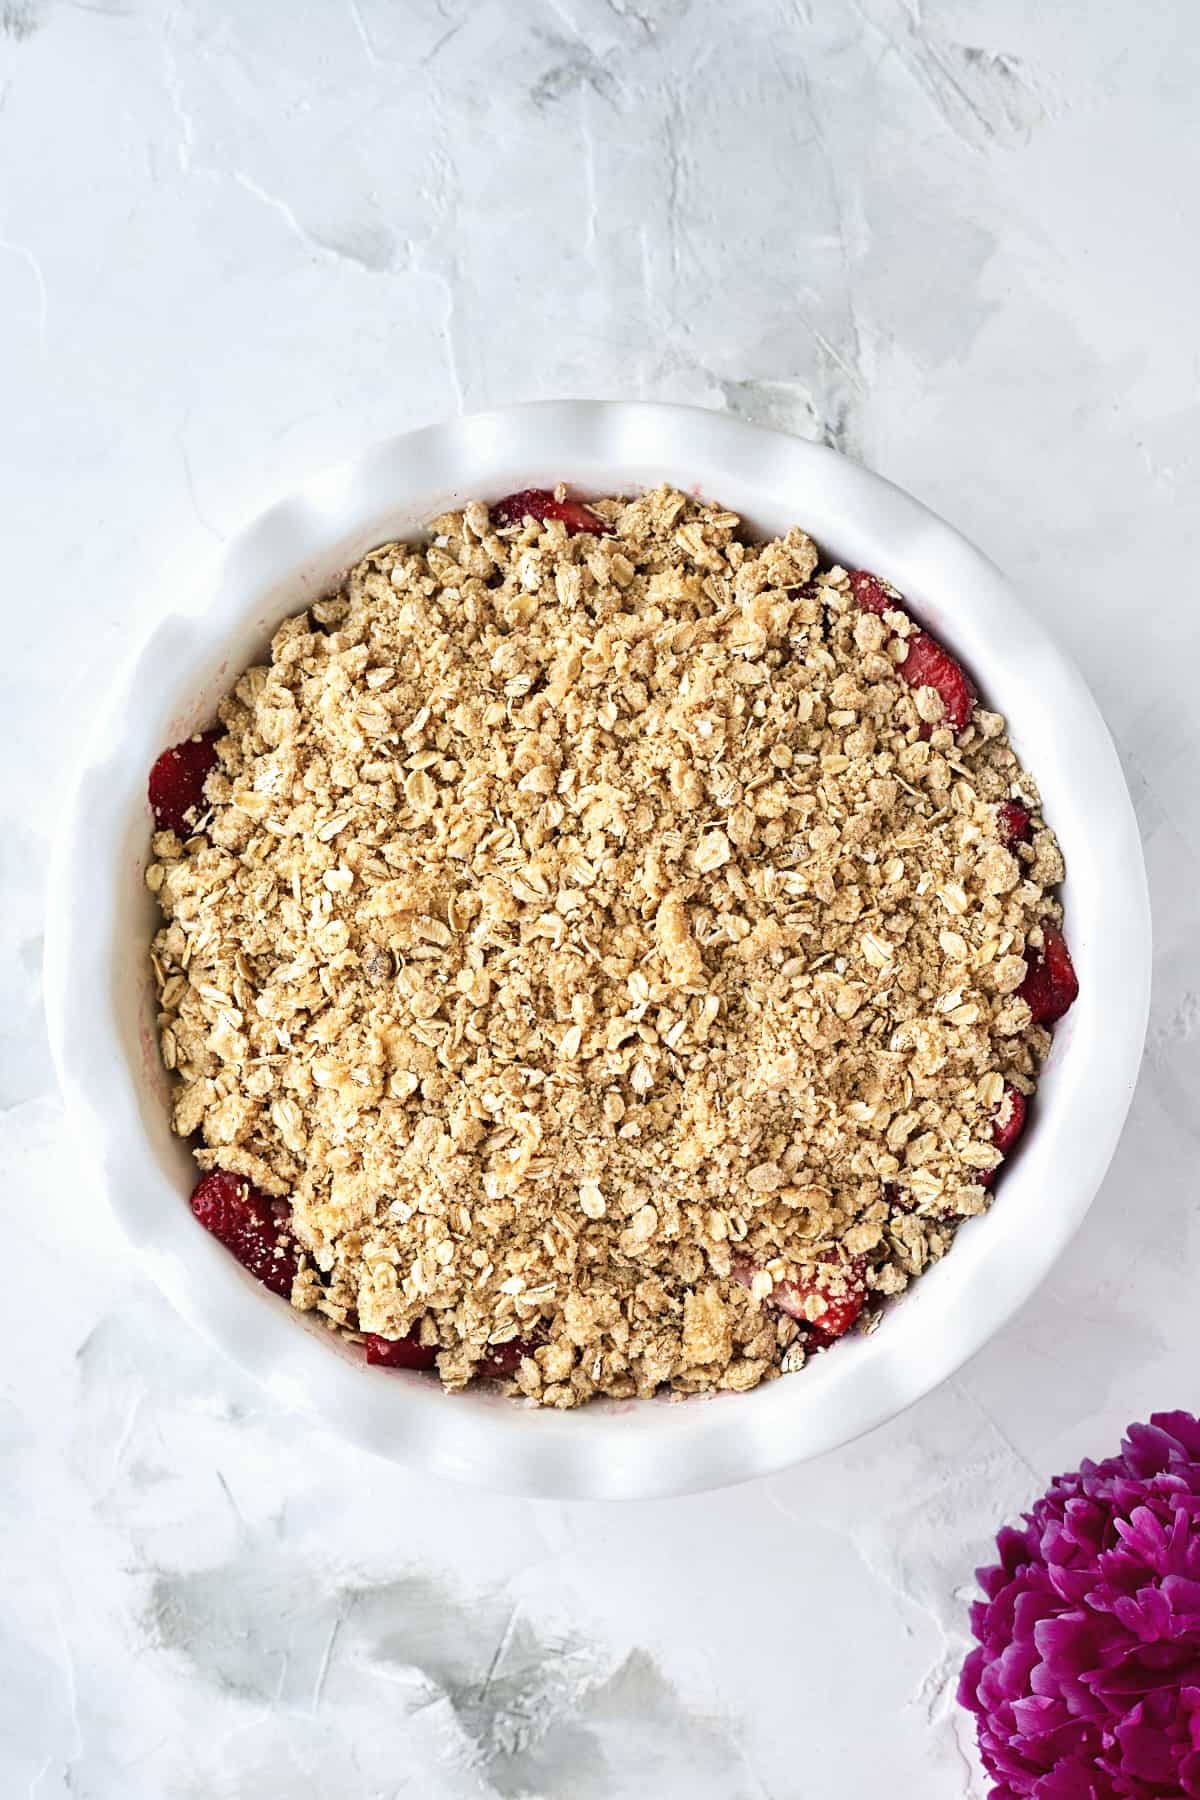 Strawberries in pie dish with oat crumble